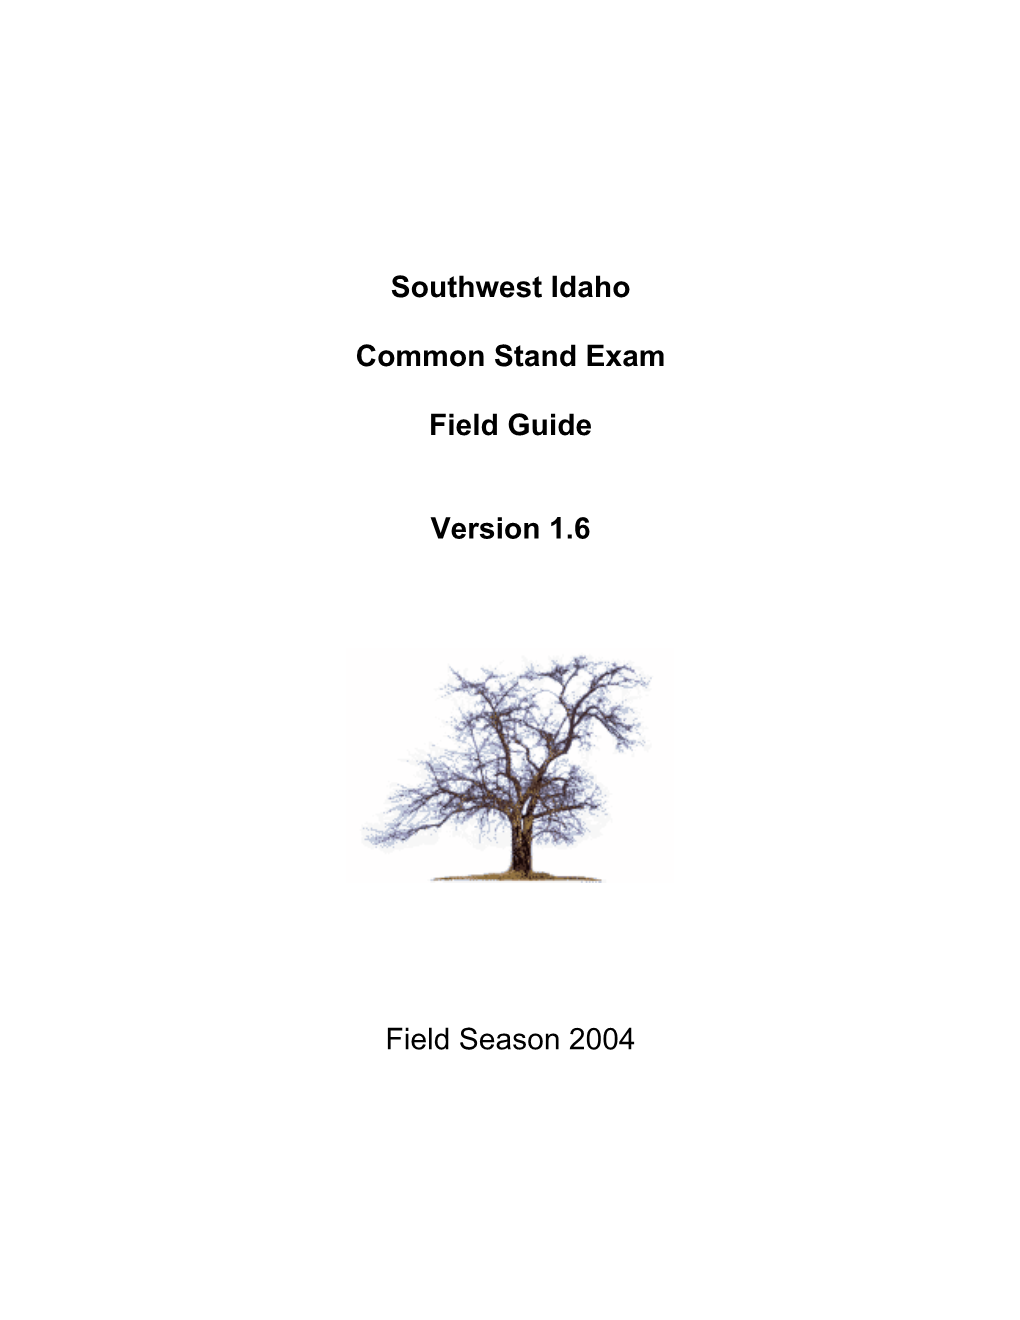 Common Stand Exam Field Guide V